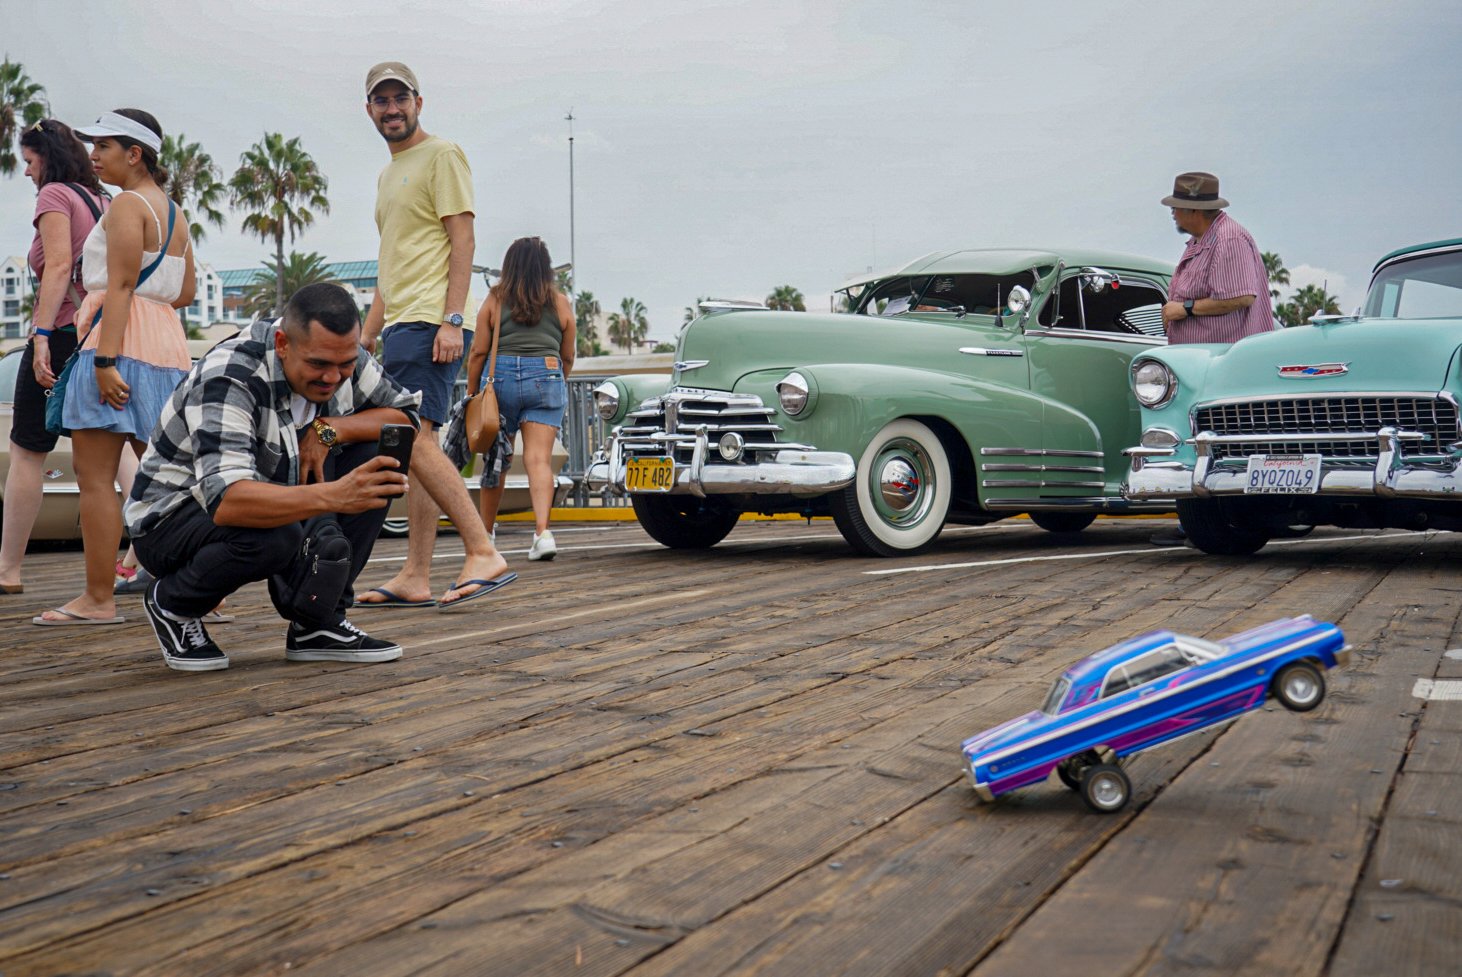  An attendee observes an RC lowrider during the End of Summer Car Show in Santa Monica, Calif. Saturday, Sept 10 2022. The Pico Youth & Family Center organized the event to celebrate hispanic culture throughout West Los Angeles. (Anthony Clingerman |